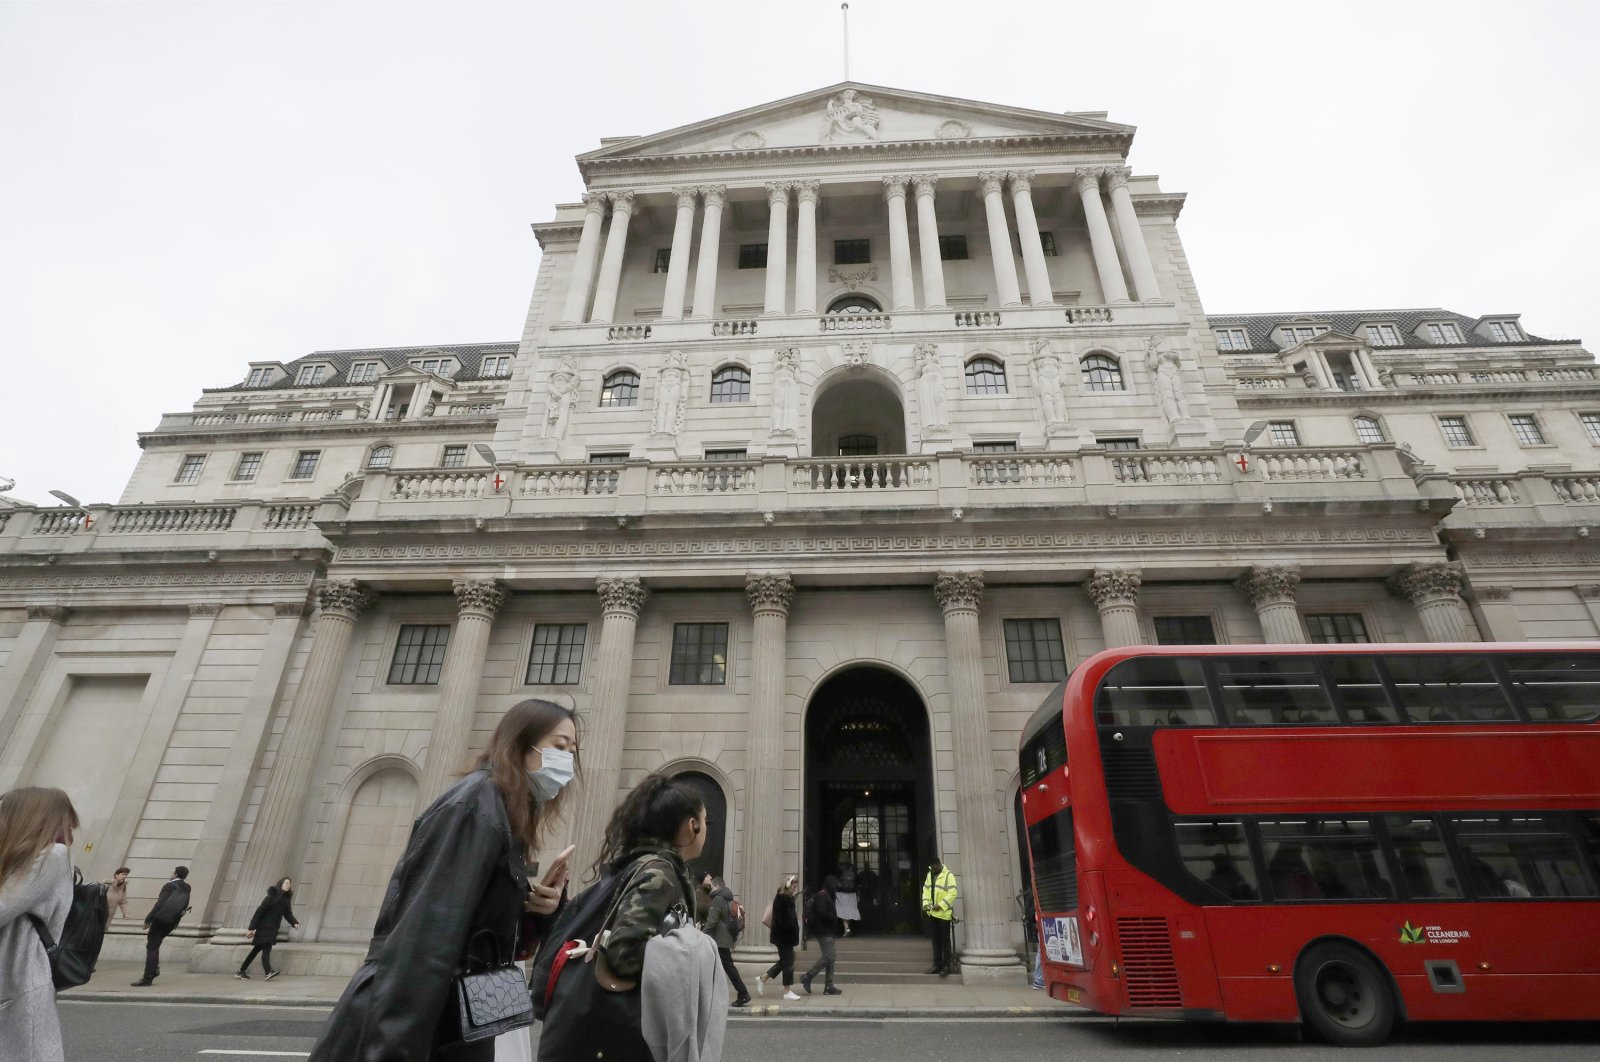 Pedestrians wearing face masks pass the Bank of England in London, Britain, March 11, 2020. (AP Photo)